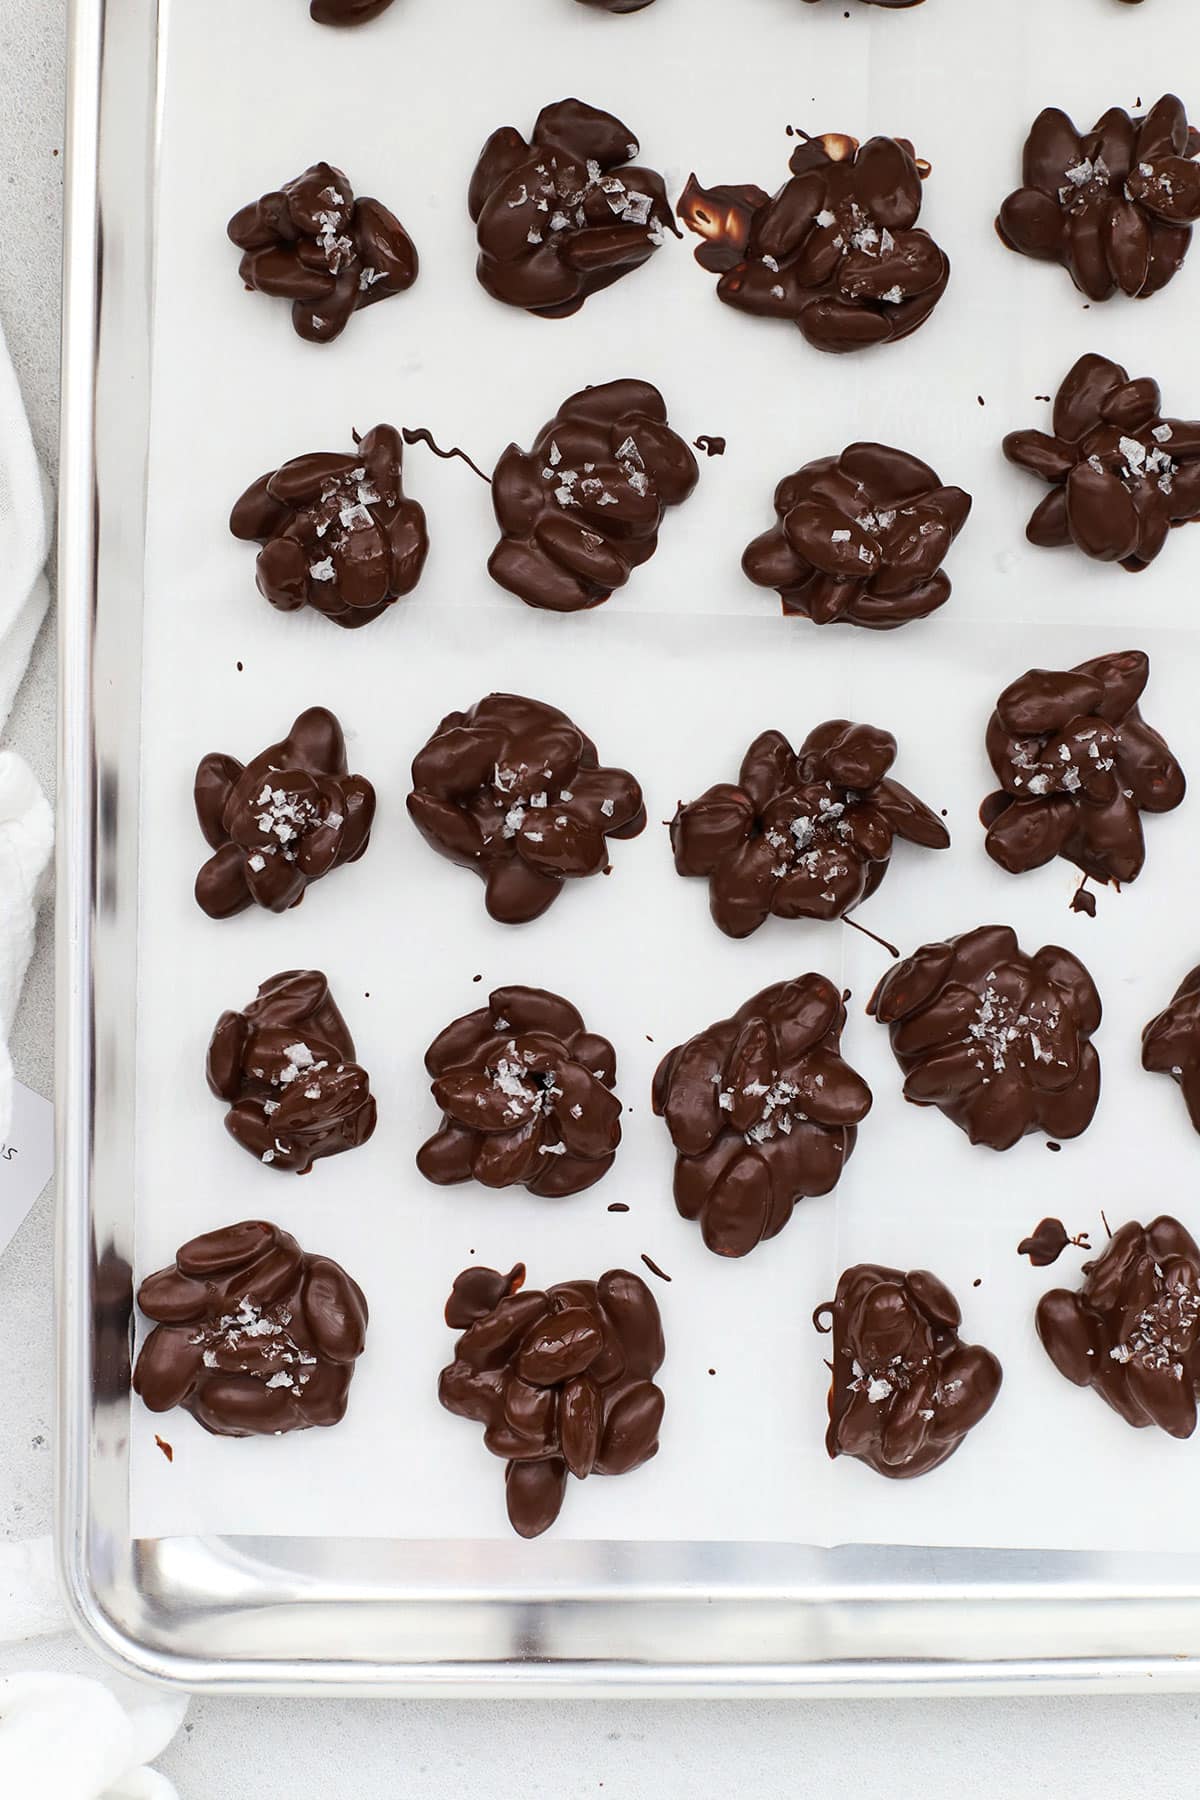 Chocolate almond clusters on a baking sheet lined with parchment